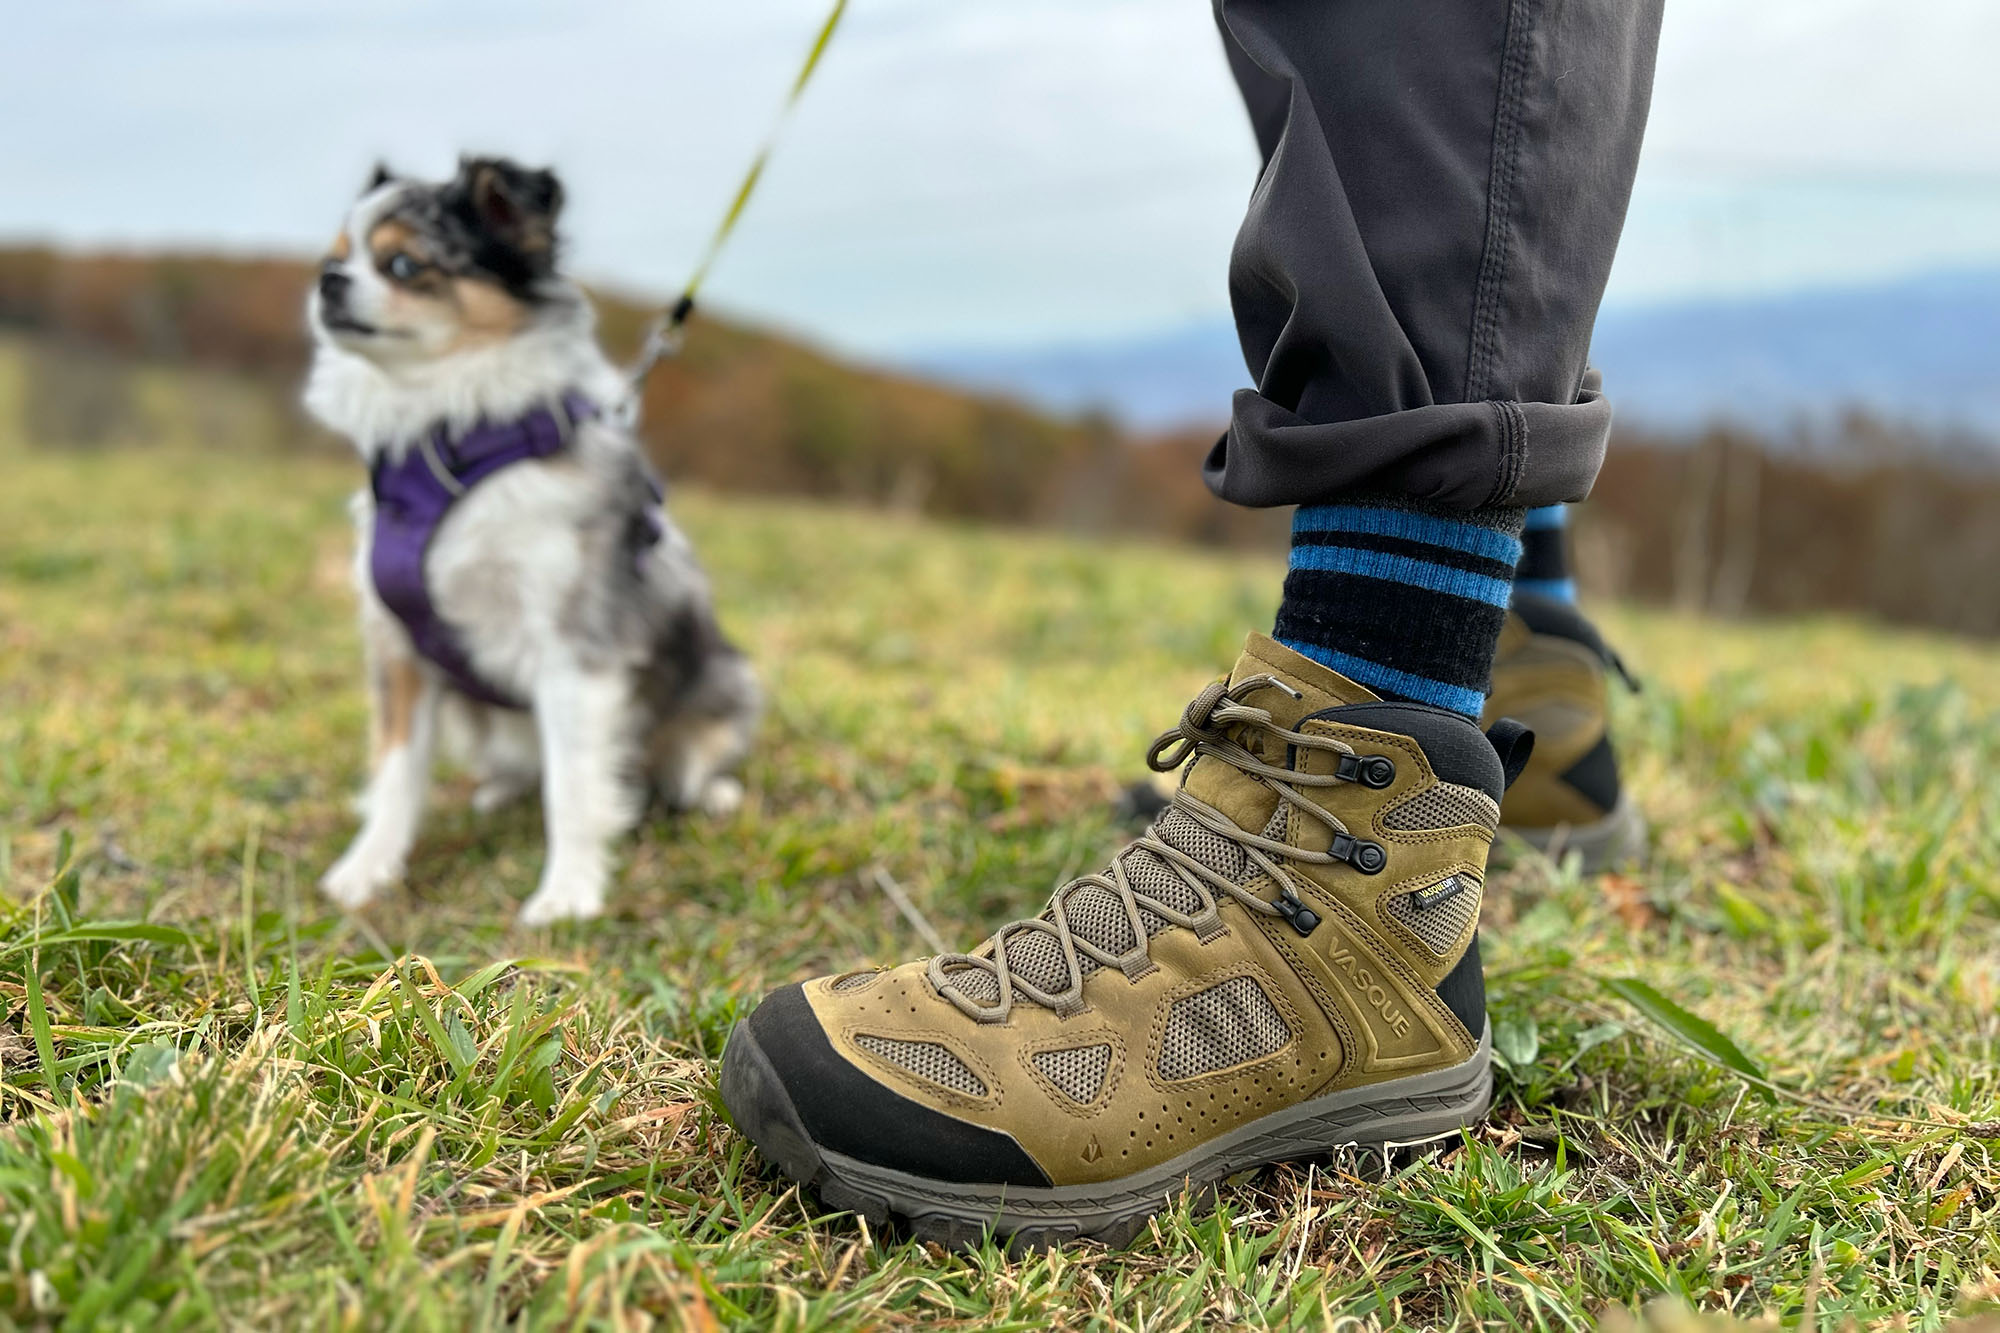 Vasque Breeze hiking boots with Charli dog